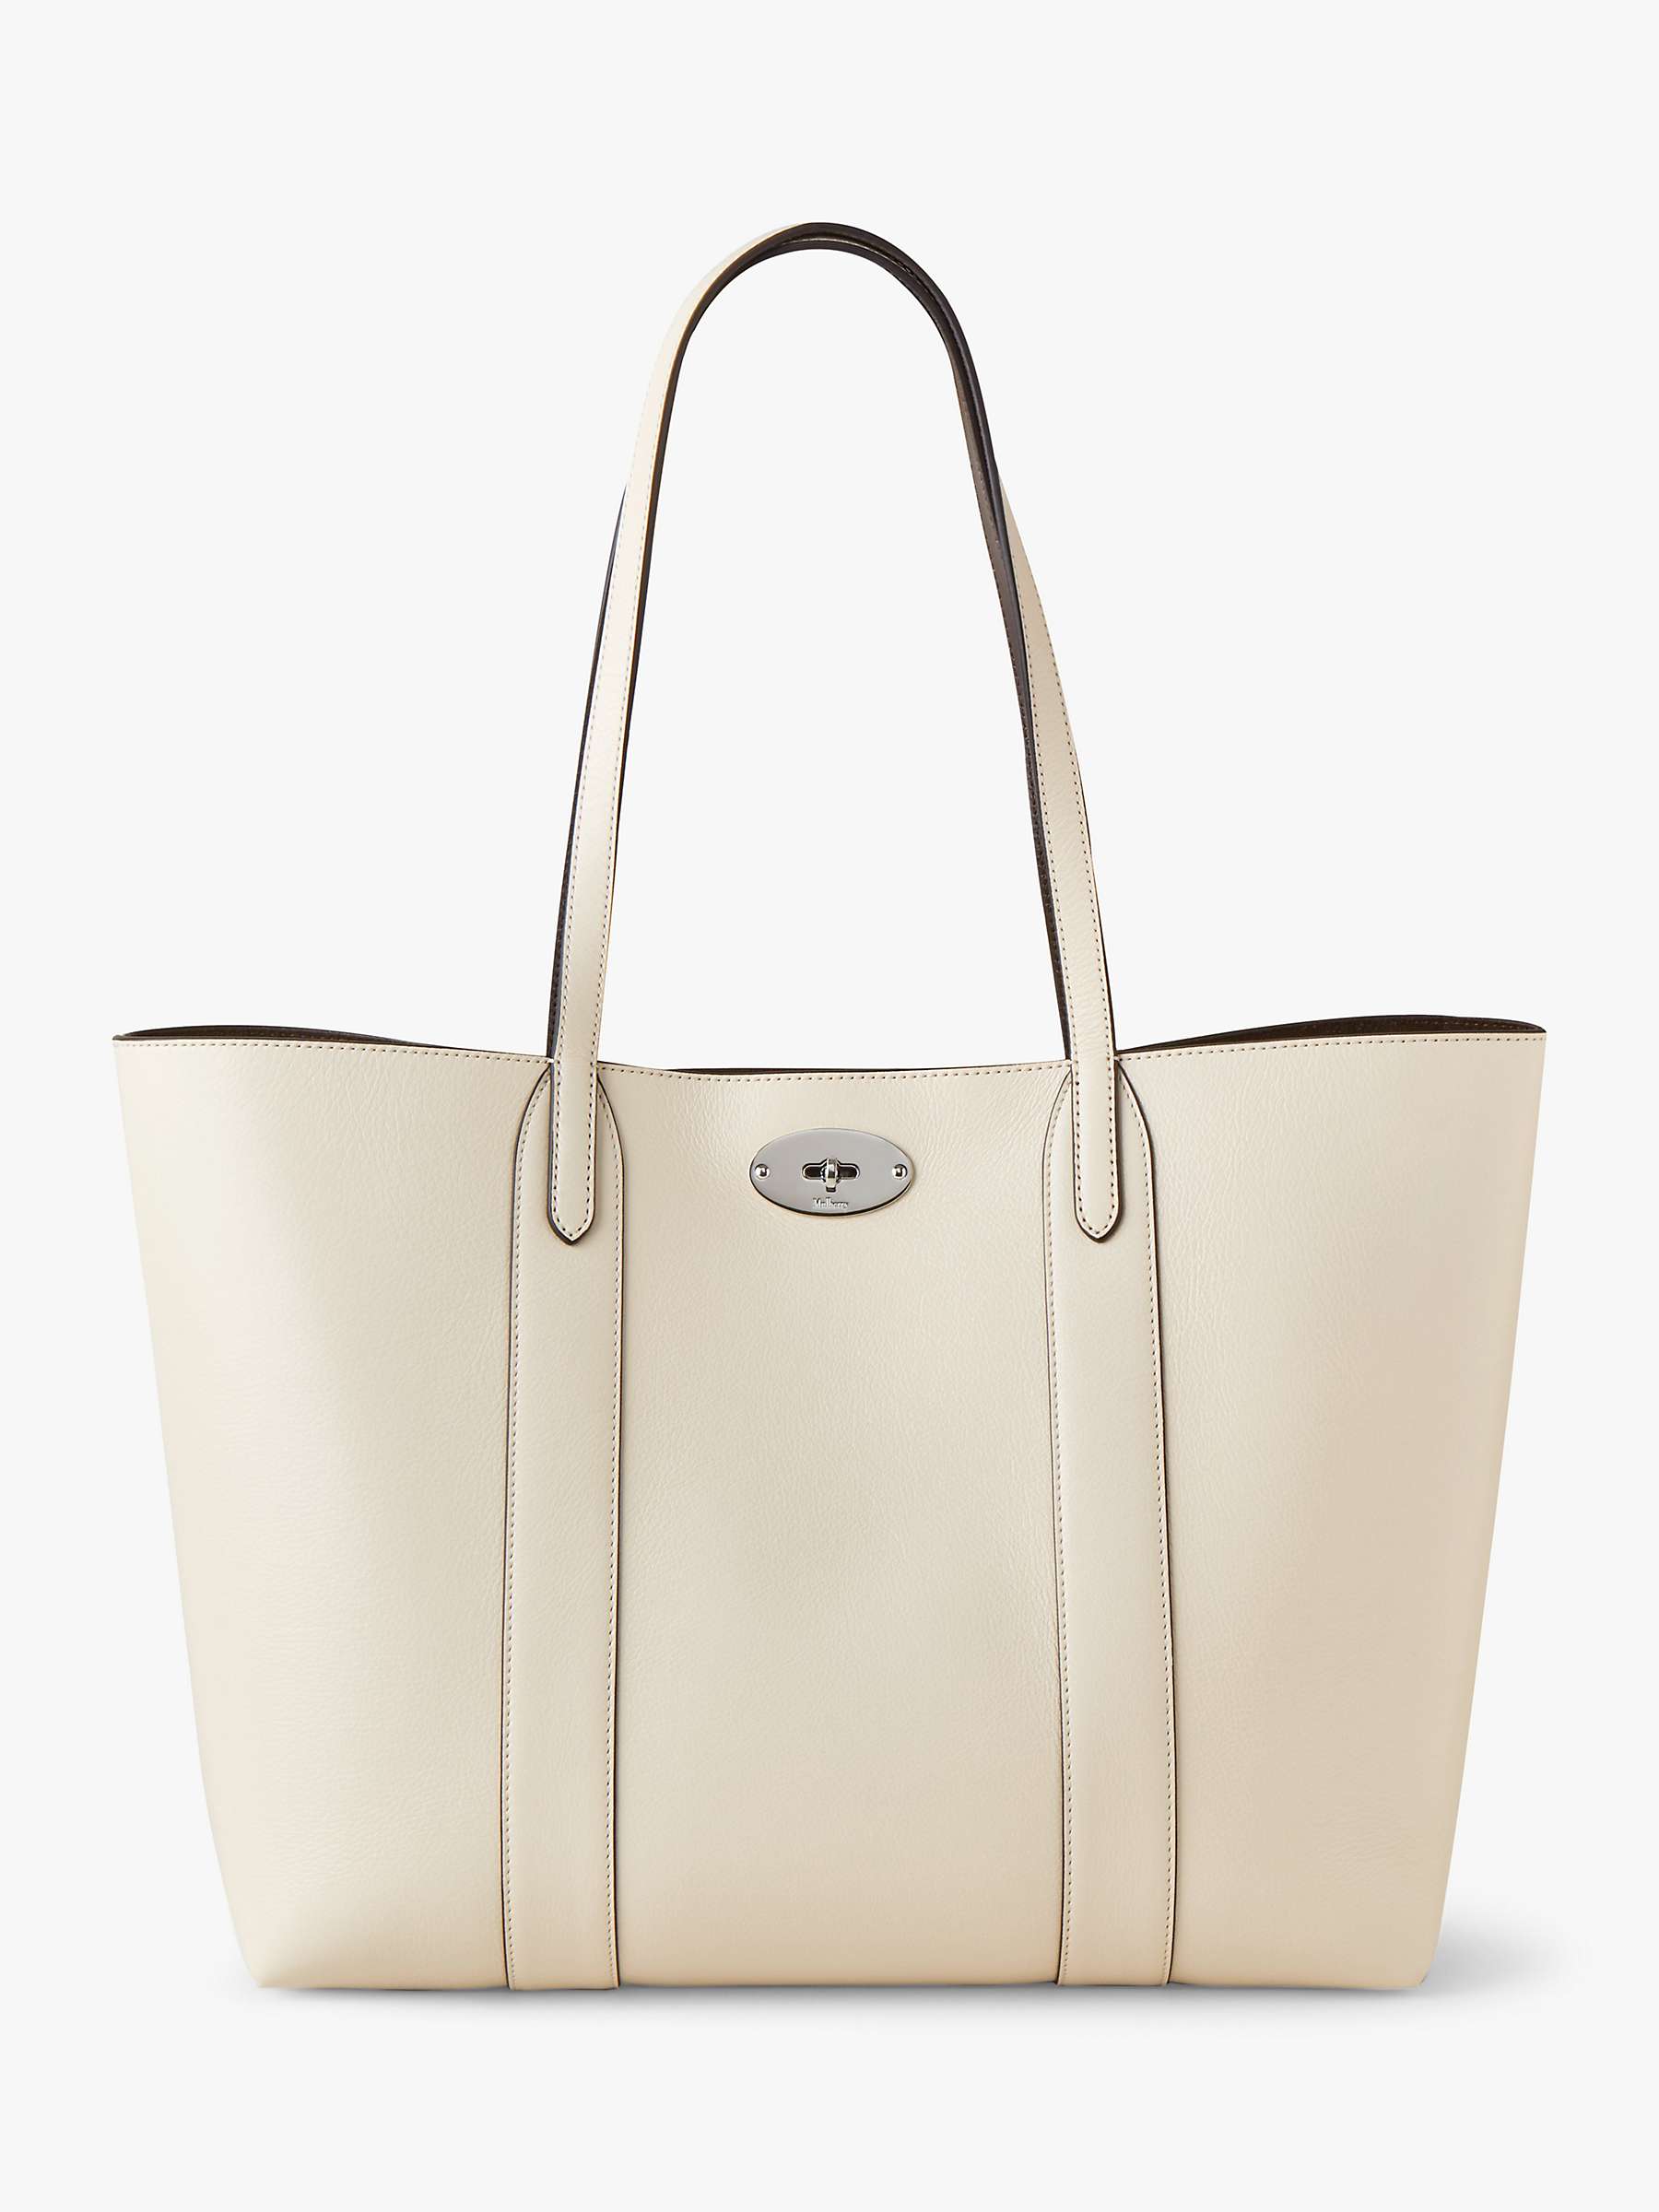 Mulberry Bayswater High Shine Leather Tote Bag, Eggshell at John Lewis &  Partners